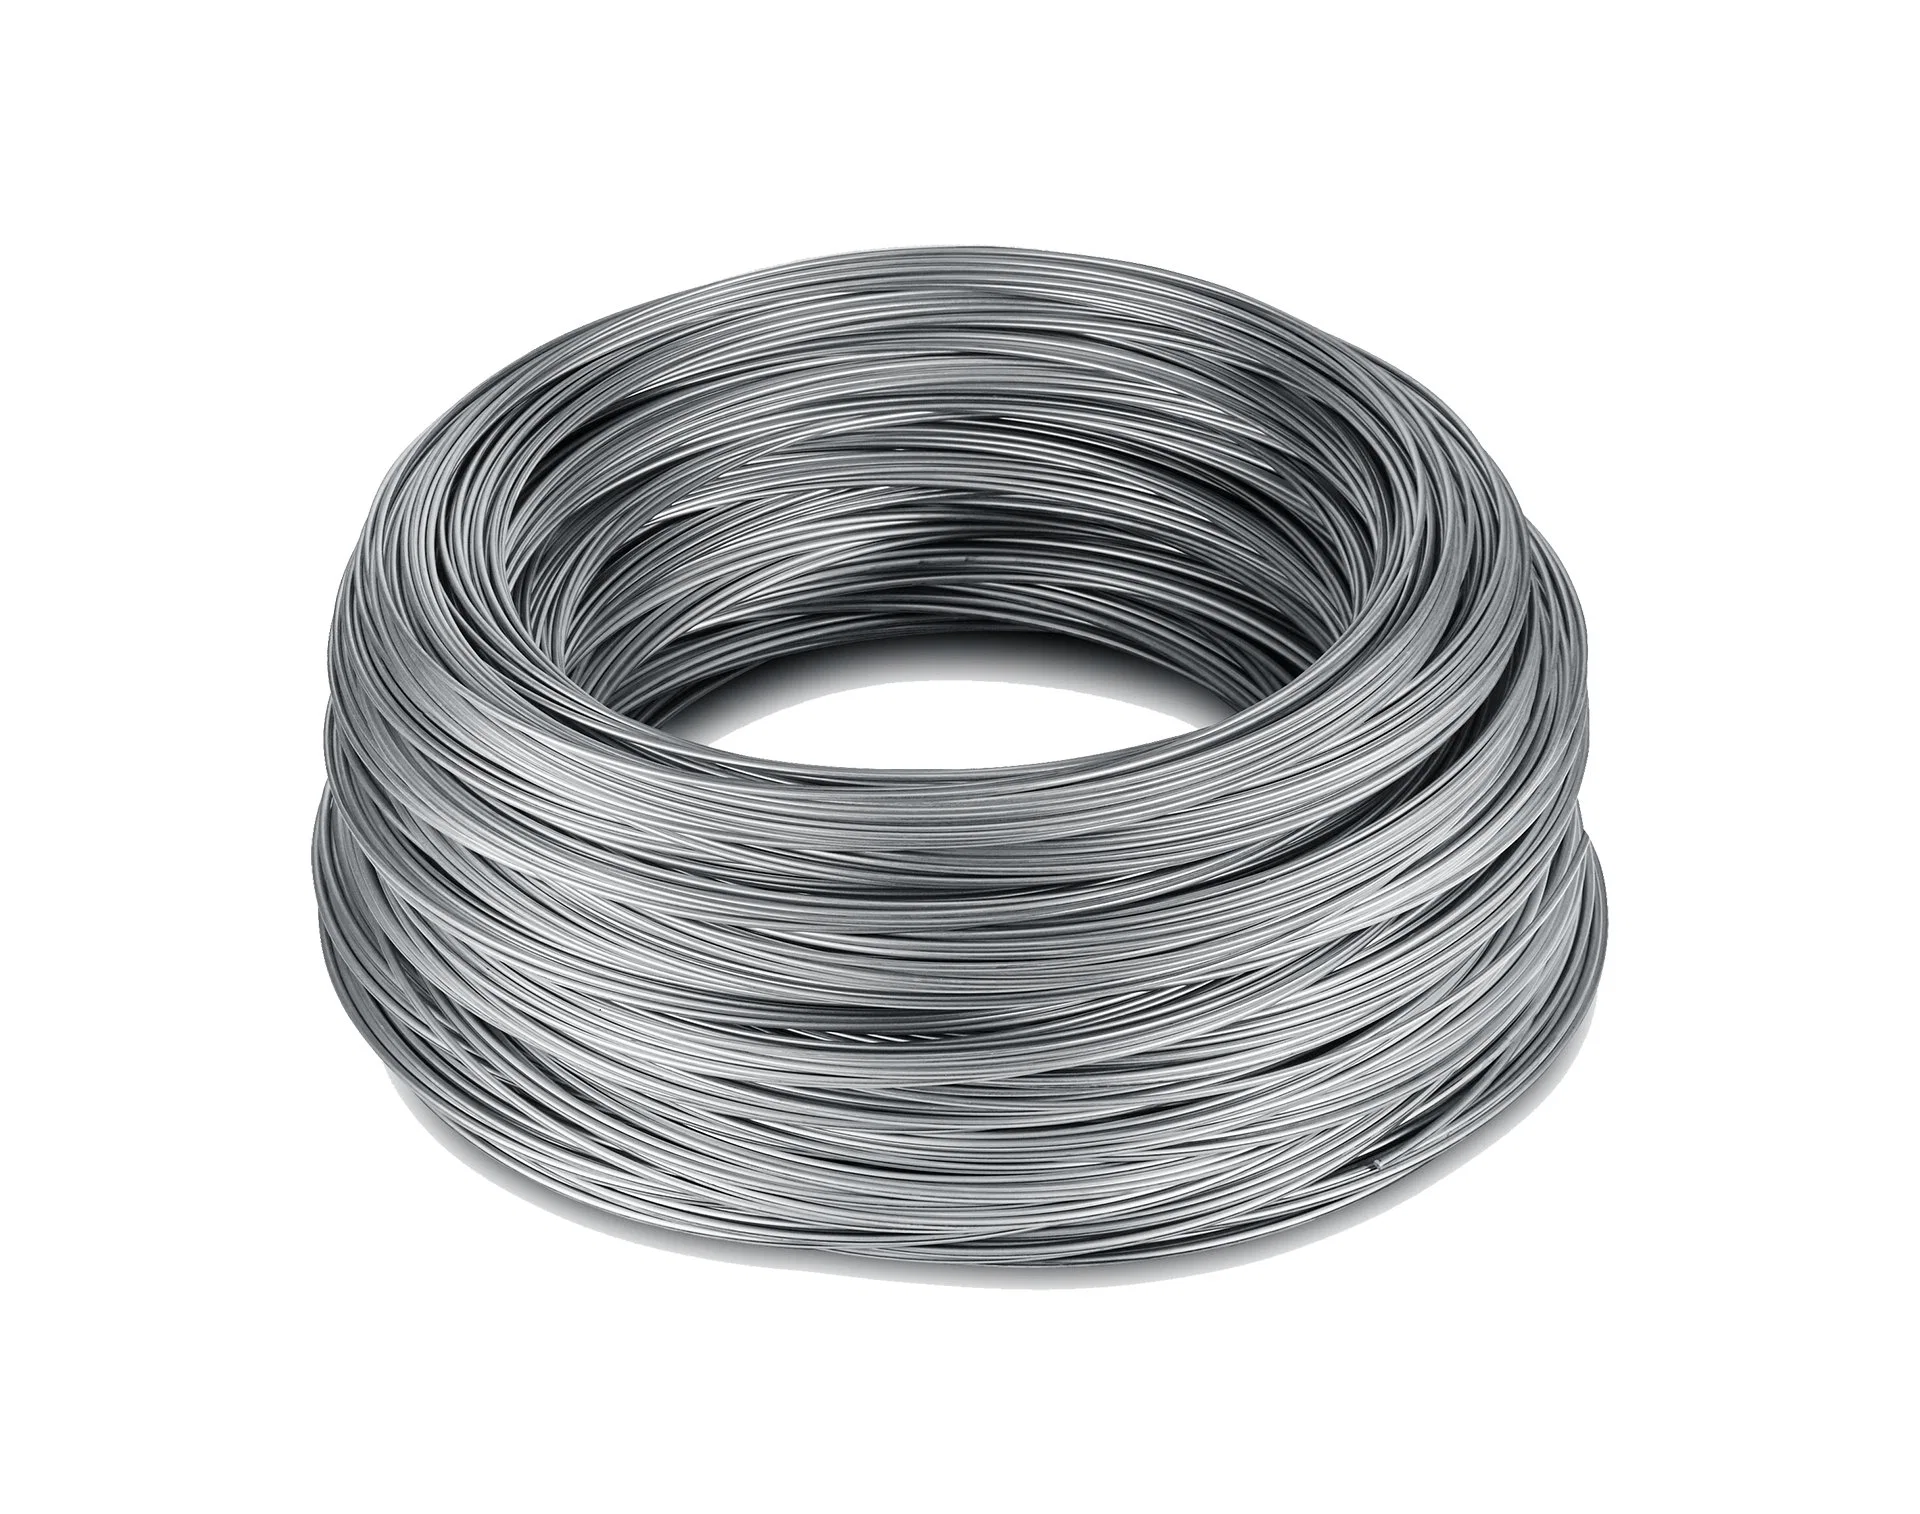 Original Factory Hard Drawn Aluminum Wire for Air Conditioning Pipe